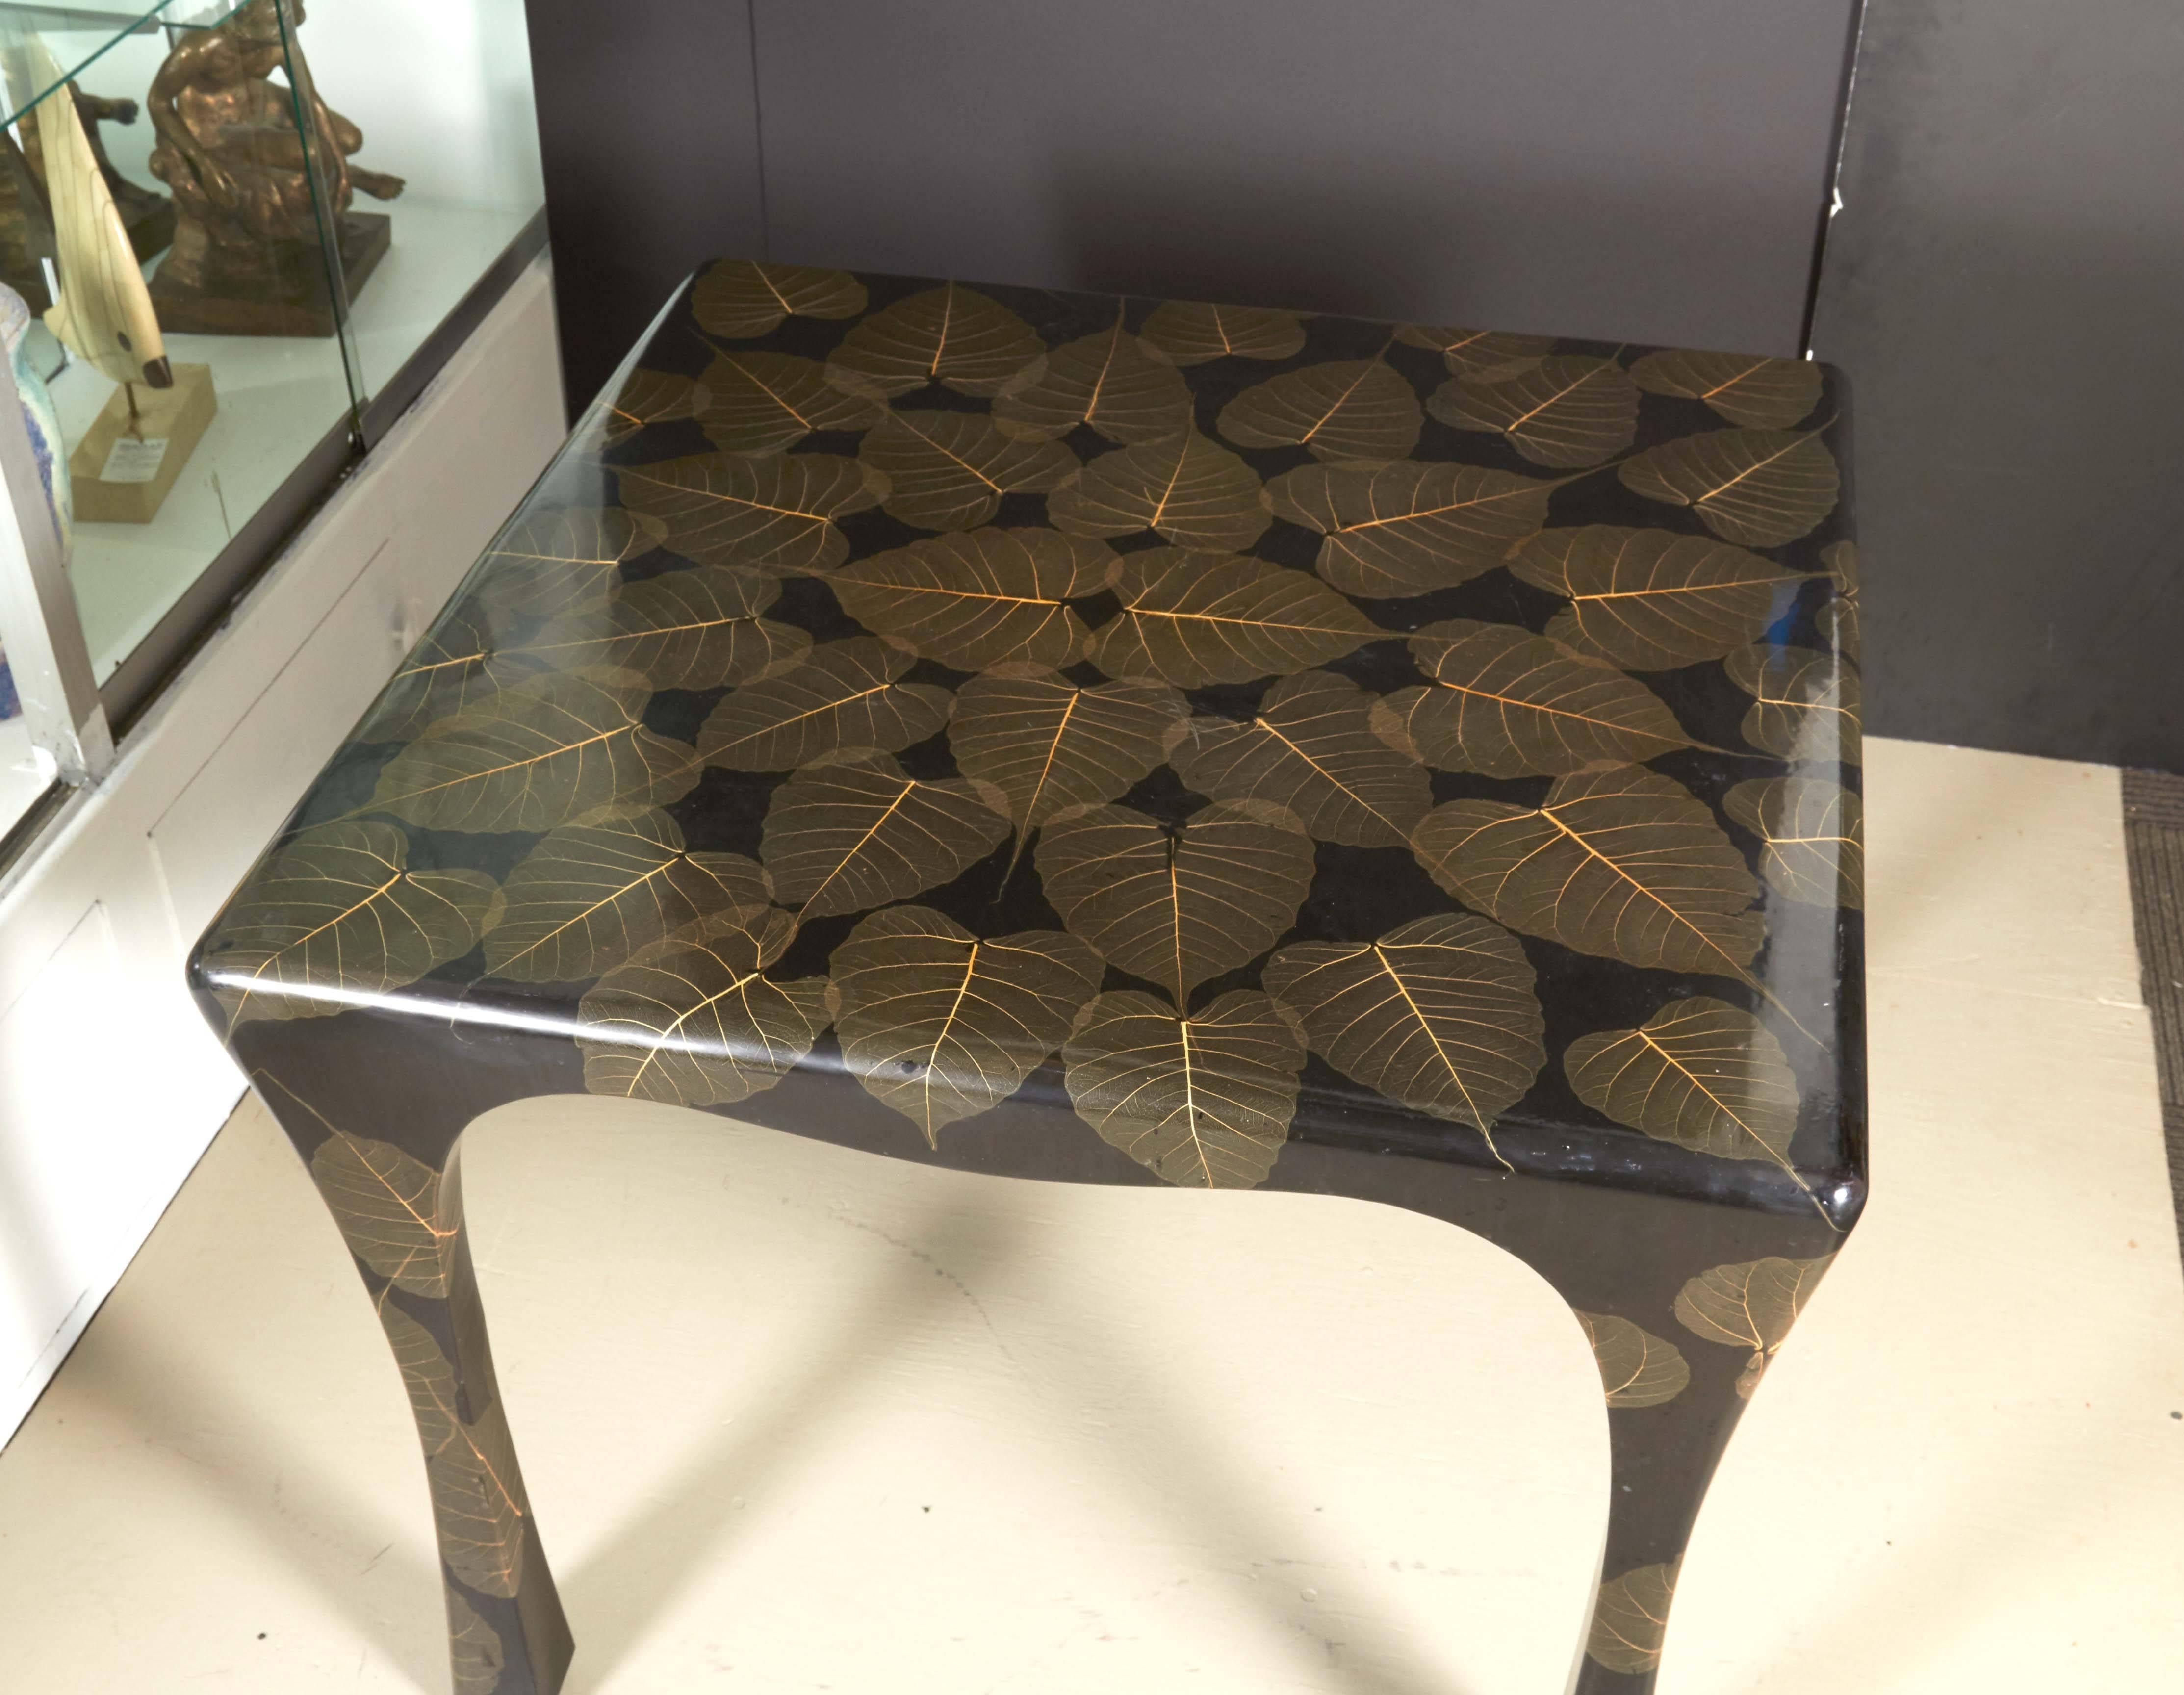 Lacquered Mid-Century Modern Asian Inspired Black Lacquer Card Table with Leaf Motif